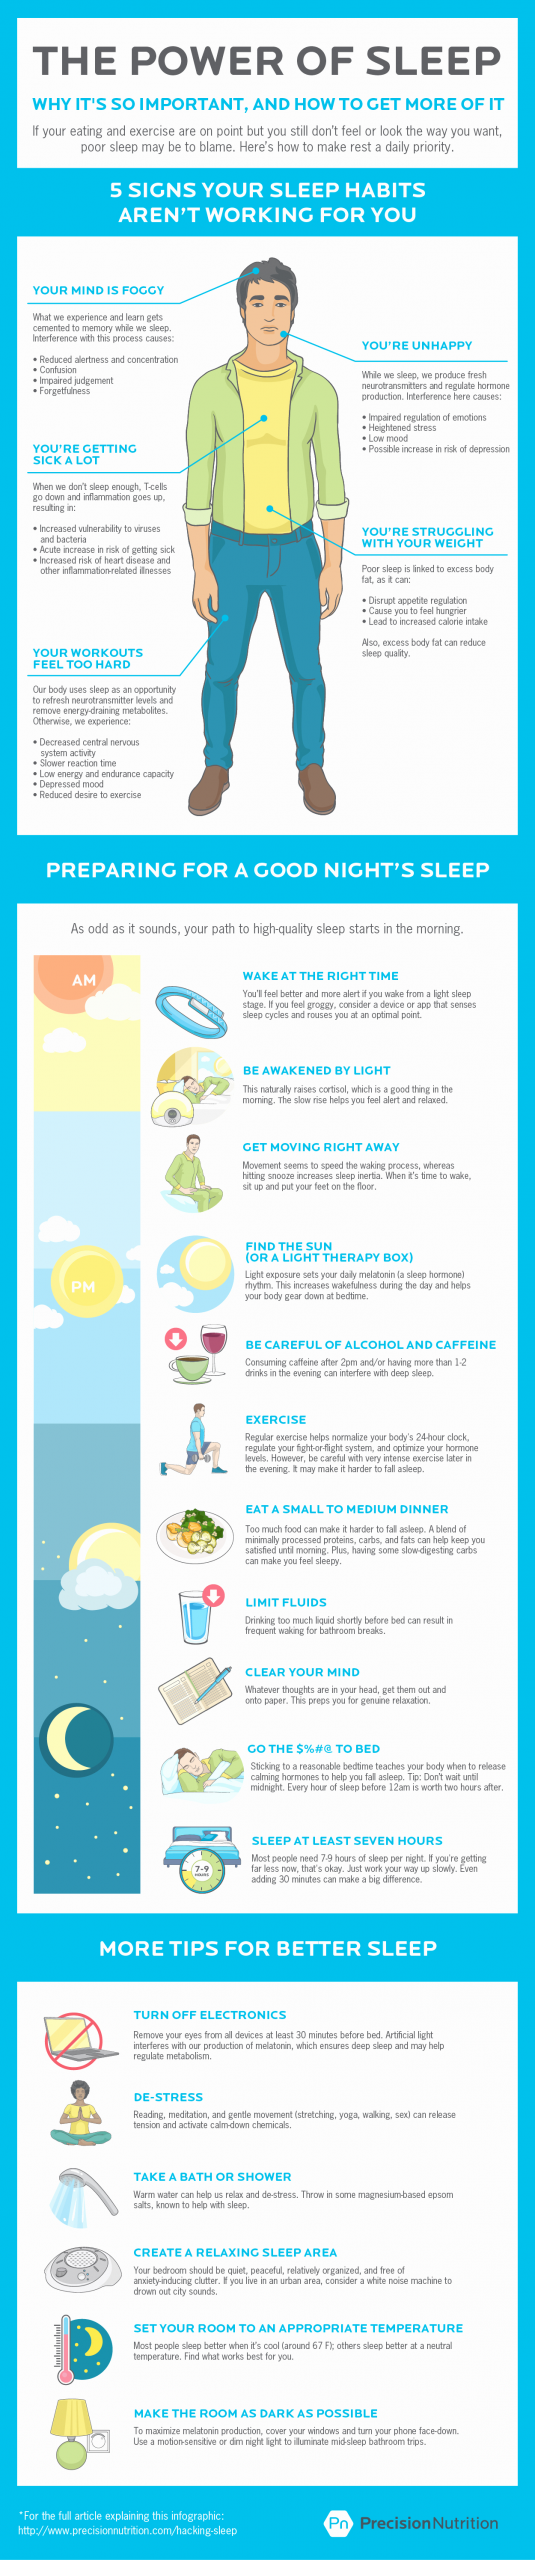 Precision Nutrition Meal Plan Template Beautiful the Power Of Sleep [infographic] why Sleep is so